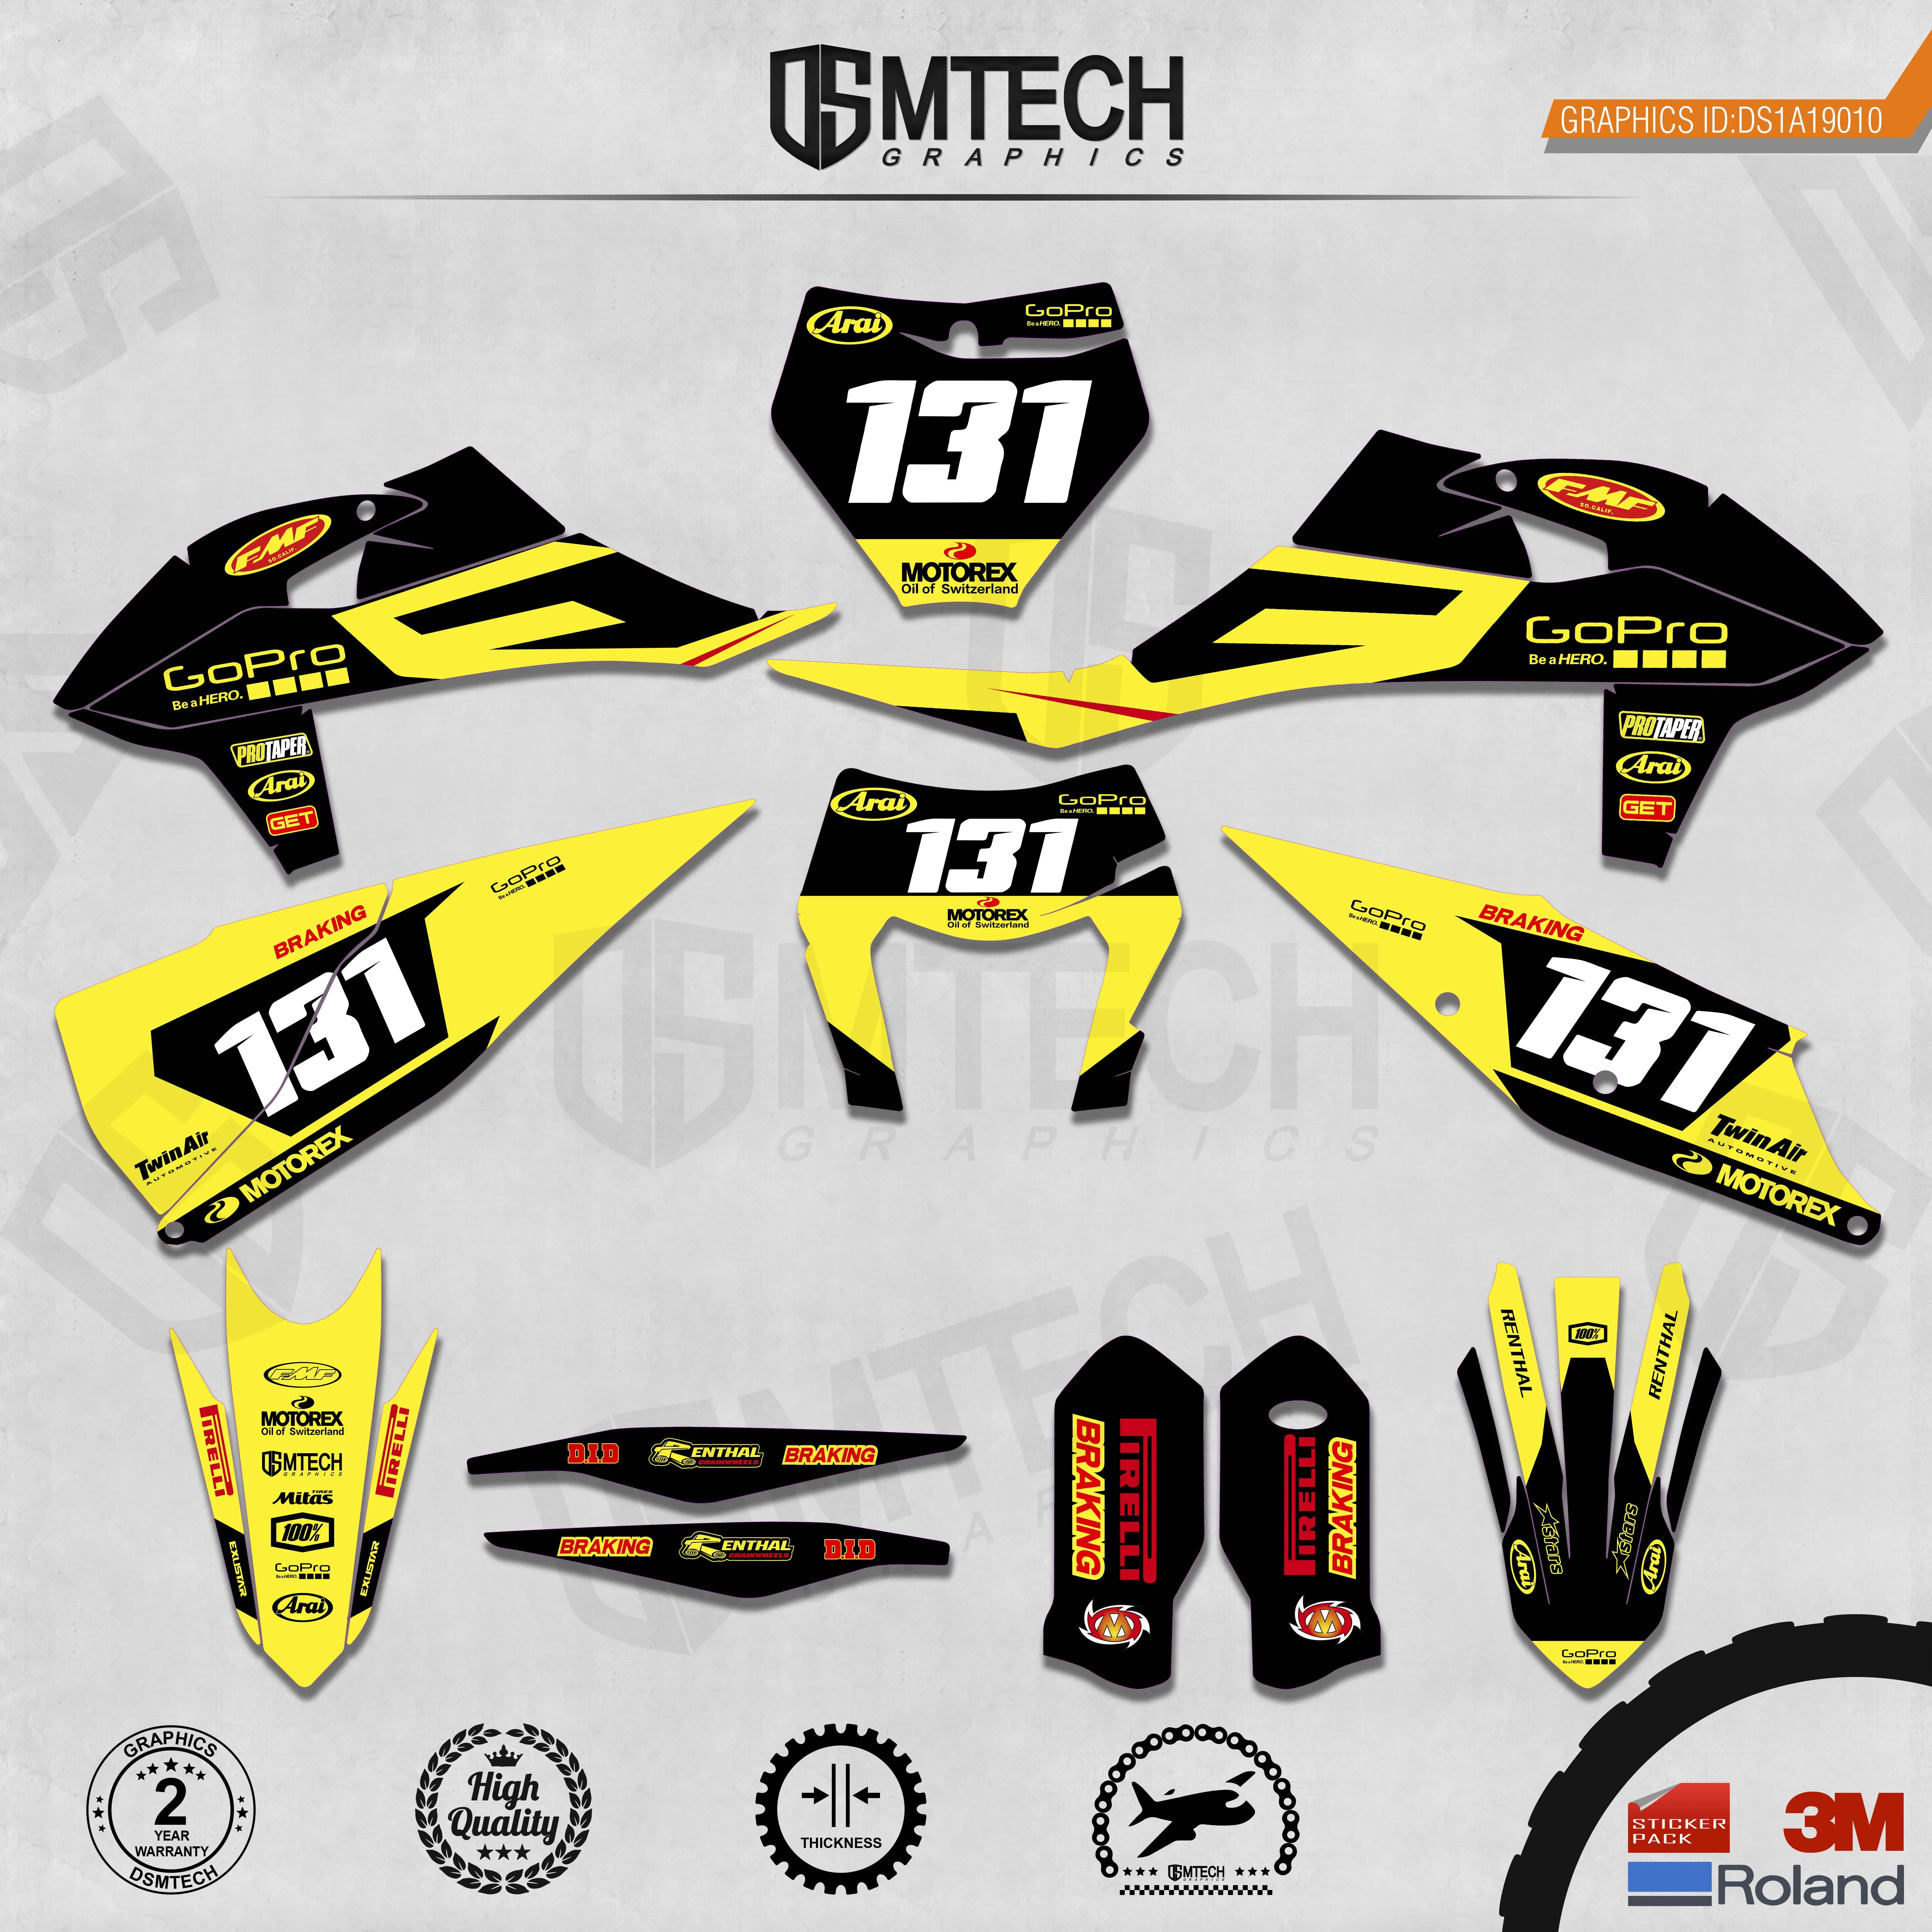 DSMTECH Customized Team Graphics Backgrounds Decals 3M Custom Stickers For 2019-2020 SXF 2020-2021EXC 010